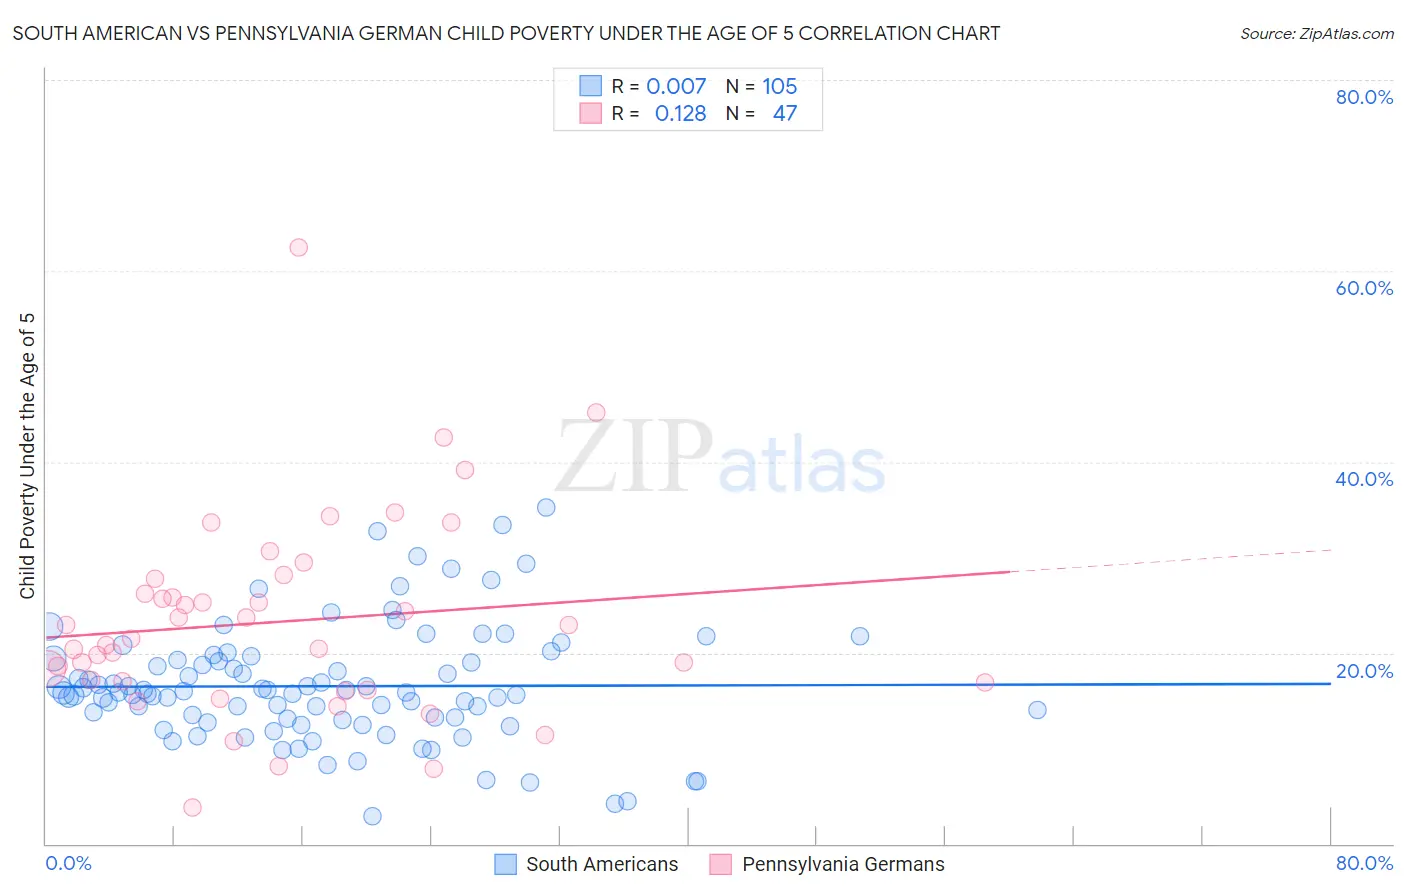 South American vs Pennsylvania German Child Poverty Under the Age of 5